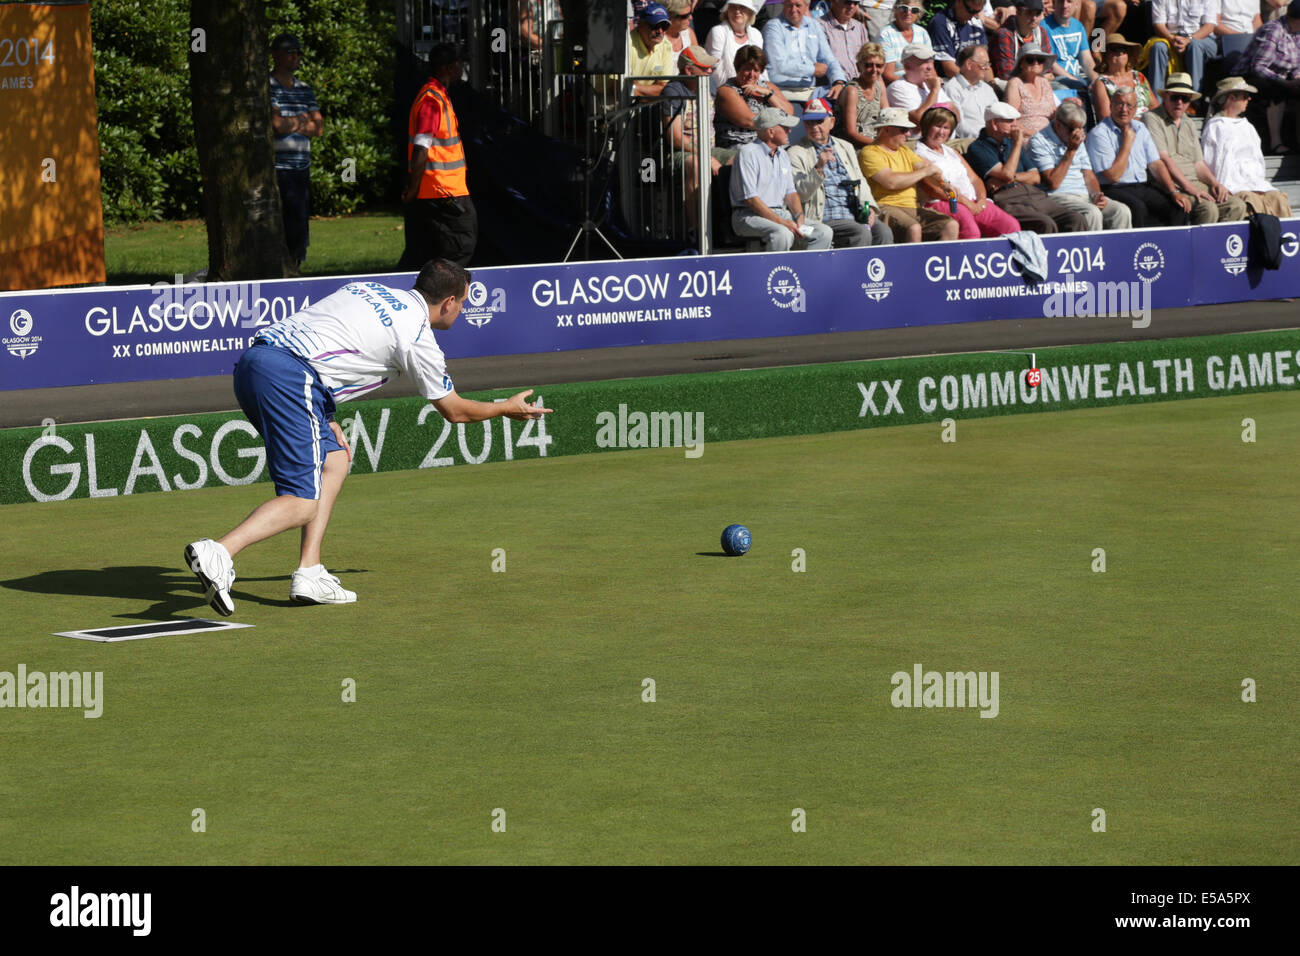 Kelvingrove Lawn Bowls Centre, Glasgow, Scotland, UK, Friday, 25th  July, 2014. Neil Speirs of Scotland playing in a Men's Triples Lawn Bowls Preliminary Match at the Glasgow 2014 Commonwealth Games Stock Photo